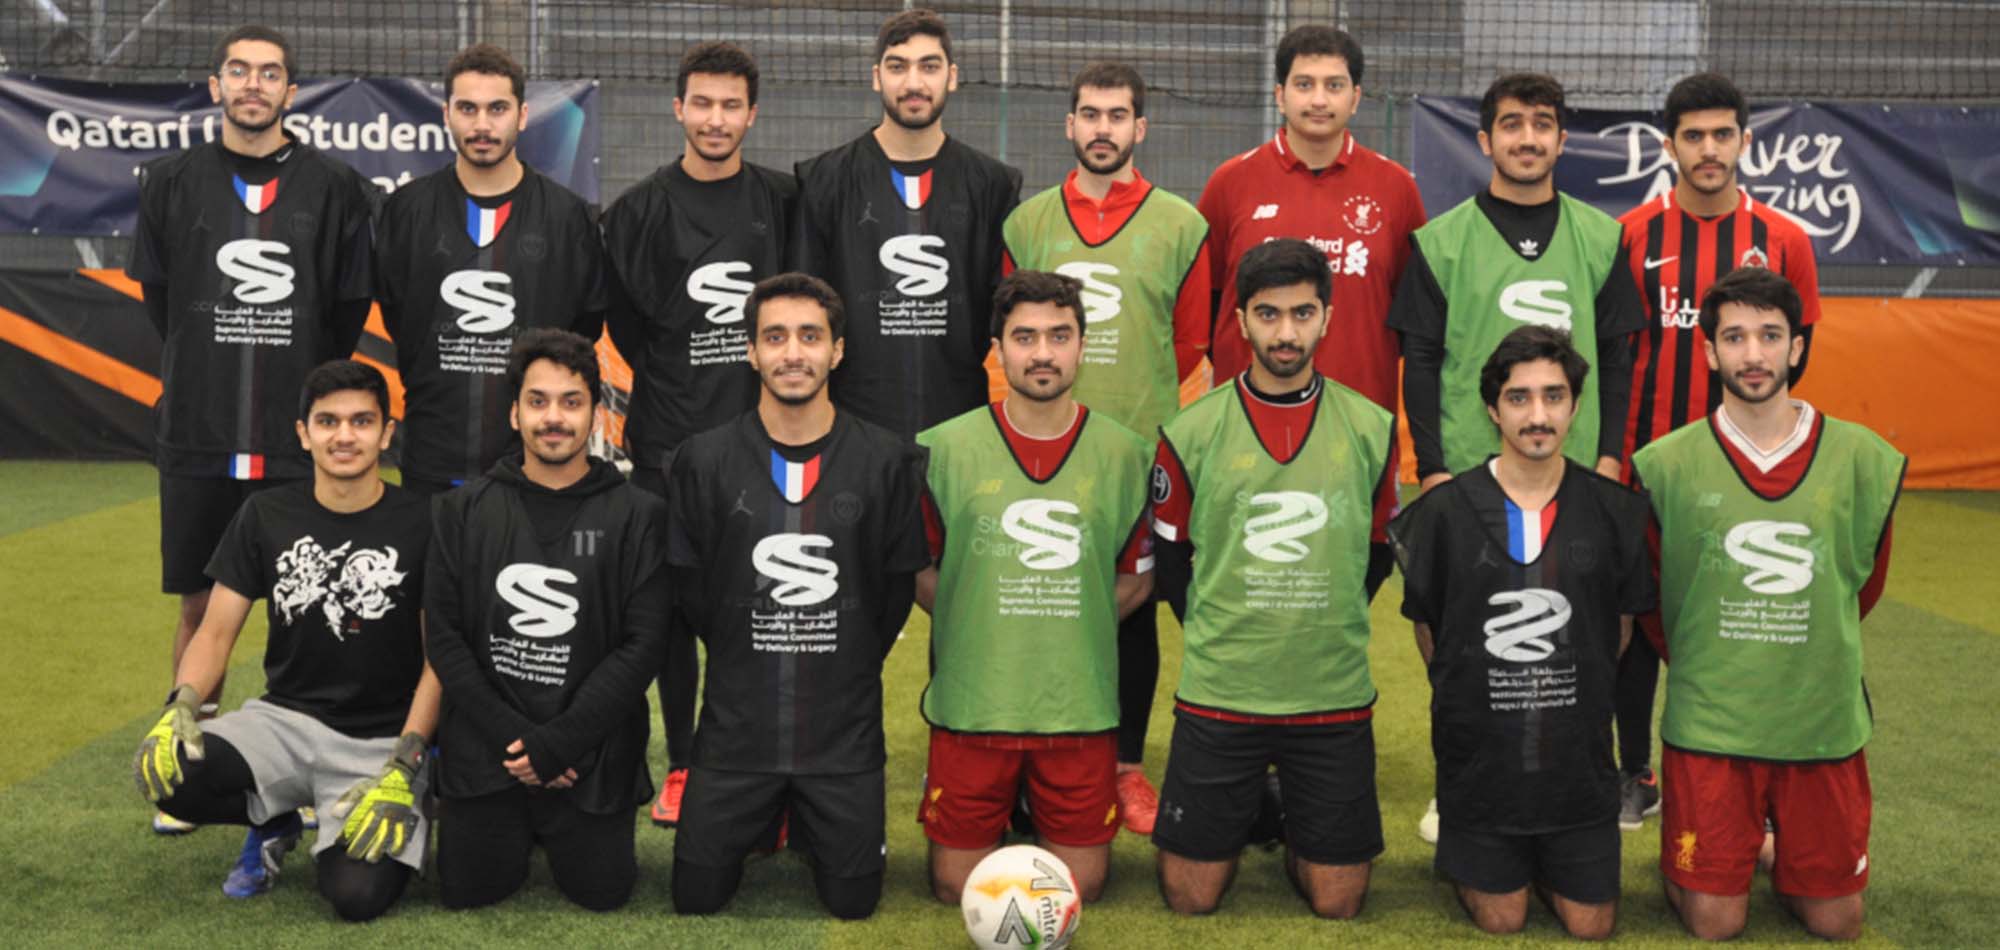 UK-based Qatari students take part in football tournament and learn about Qatar 2022 preparations